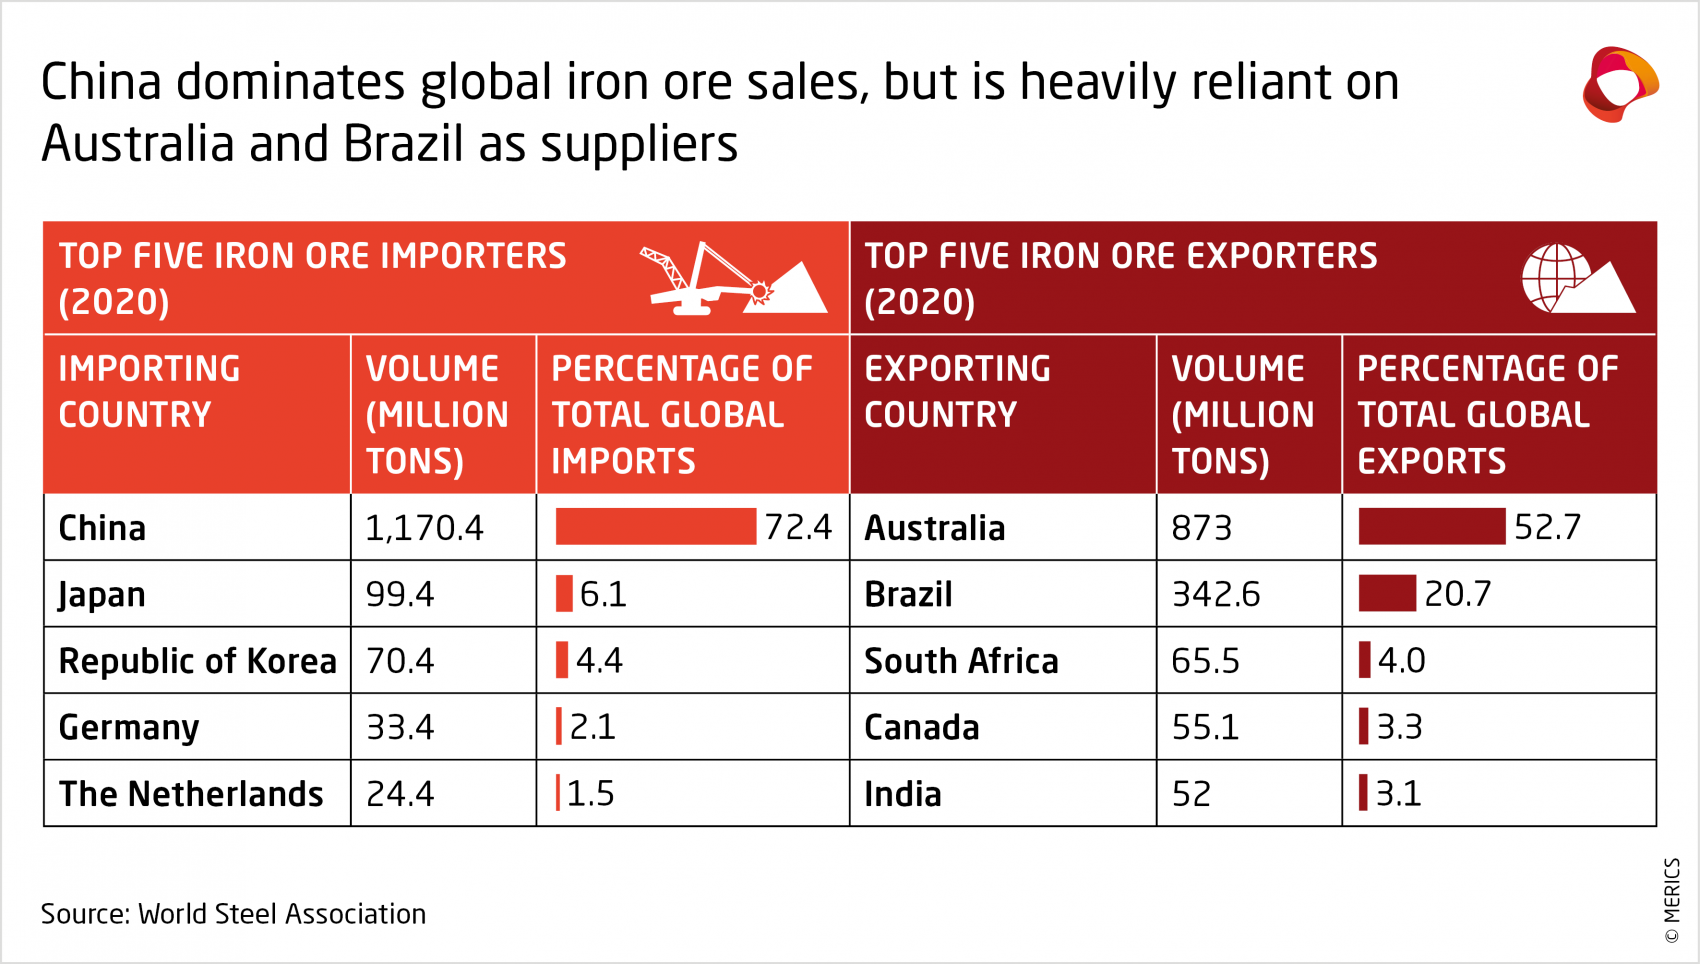 MERICS-China-Global-Competition-Iron-ore-import-and-export